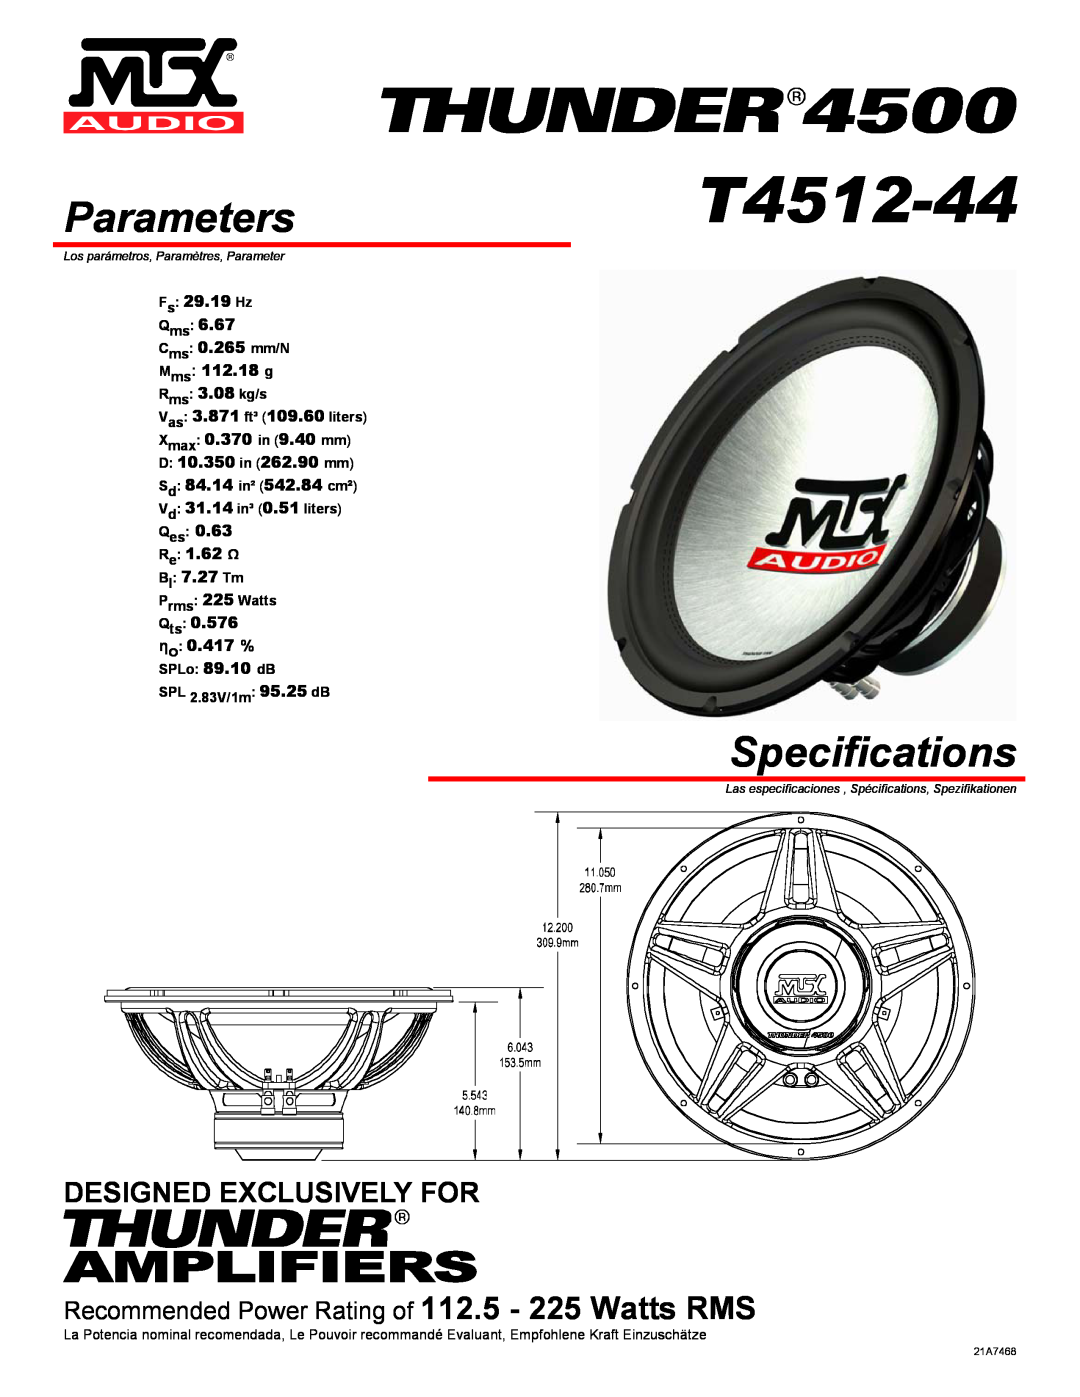 MTX Audio T4512-44 specifications Parameters, Specifications, Amplifiers, Designed Exclusively For, Fs 29.19 Hz Qms 